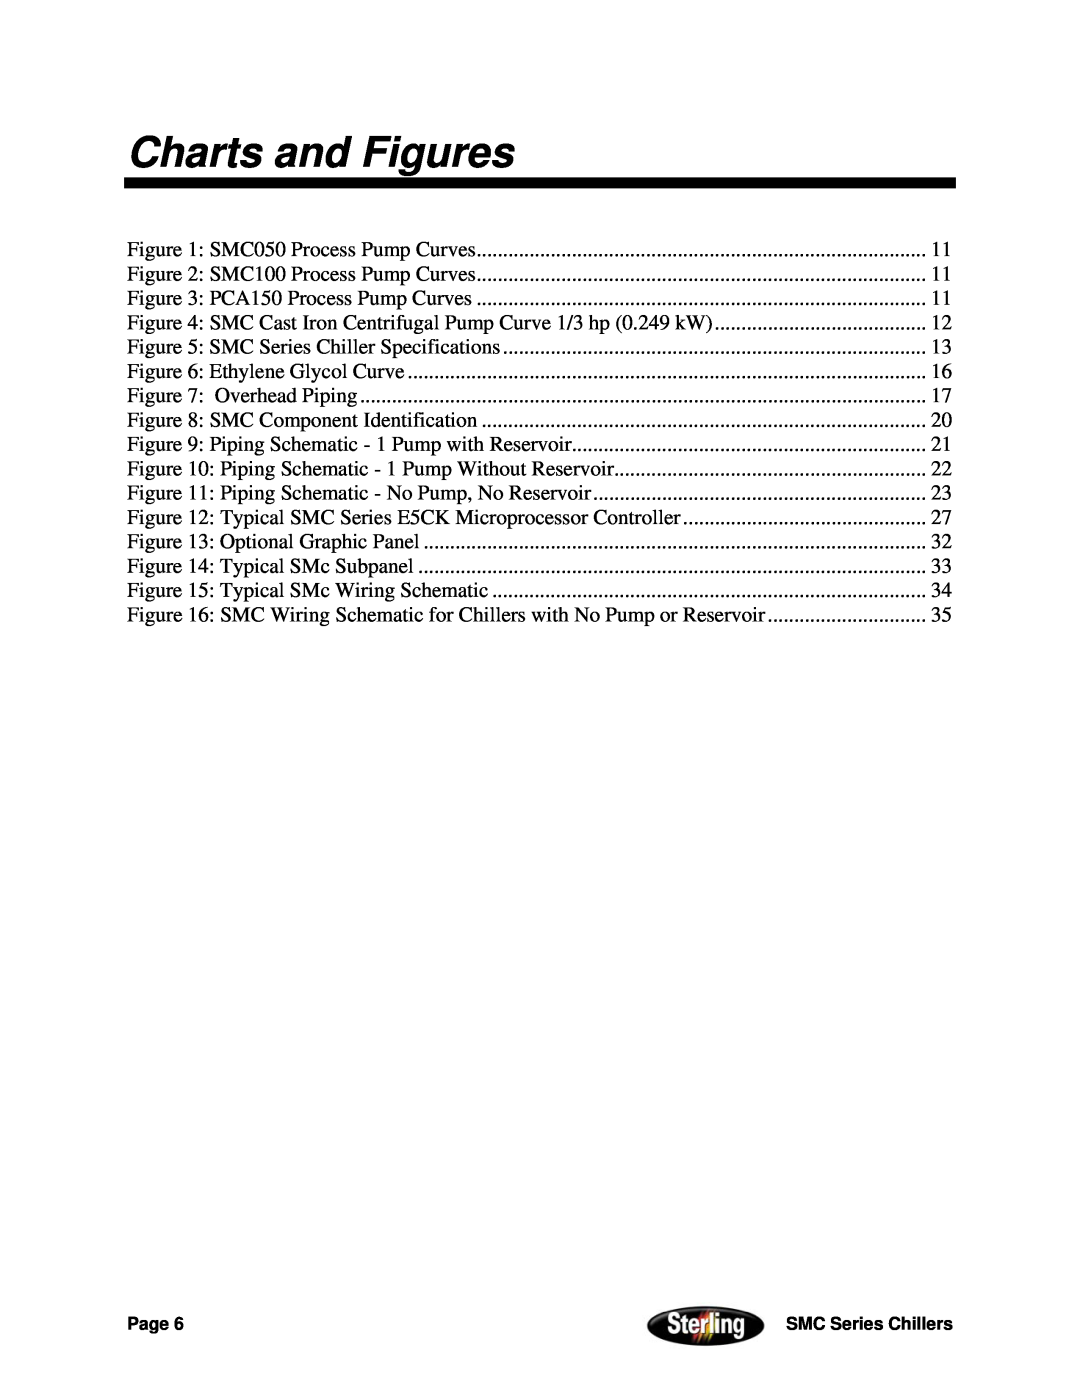 Sterling Power Products 30F to 65F installation manual Charts and Figures 